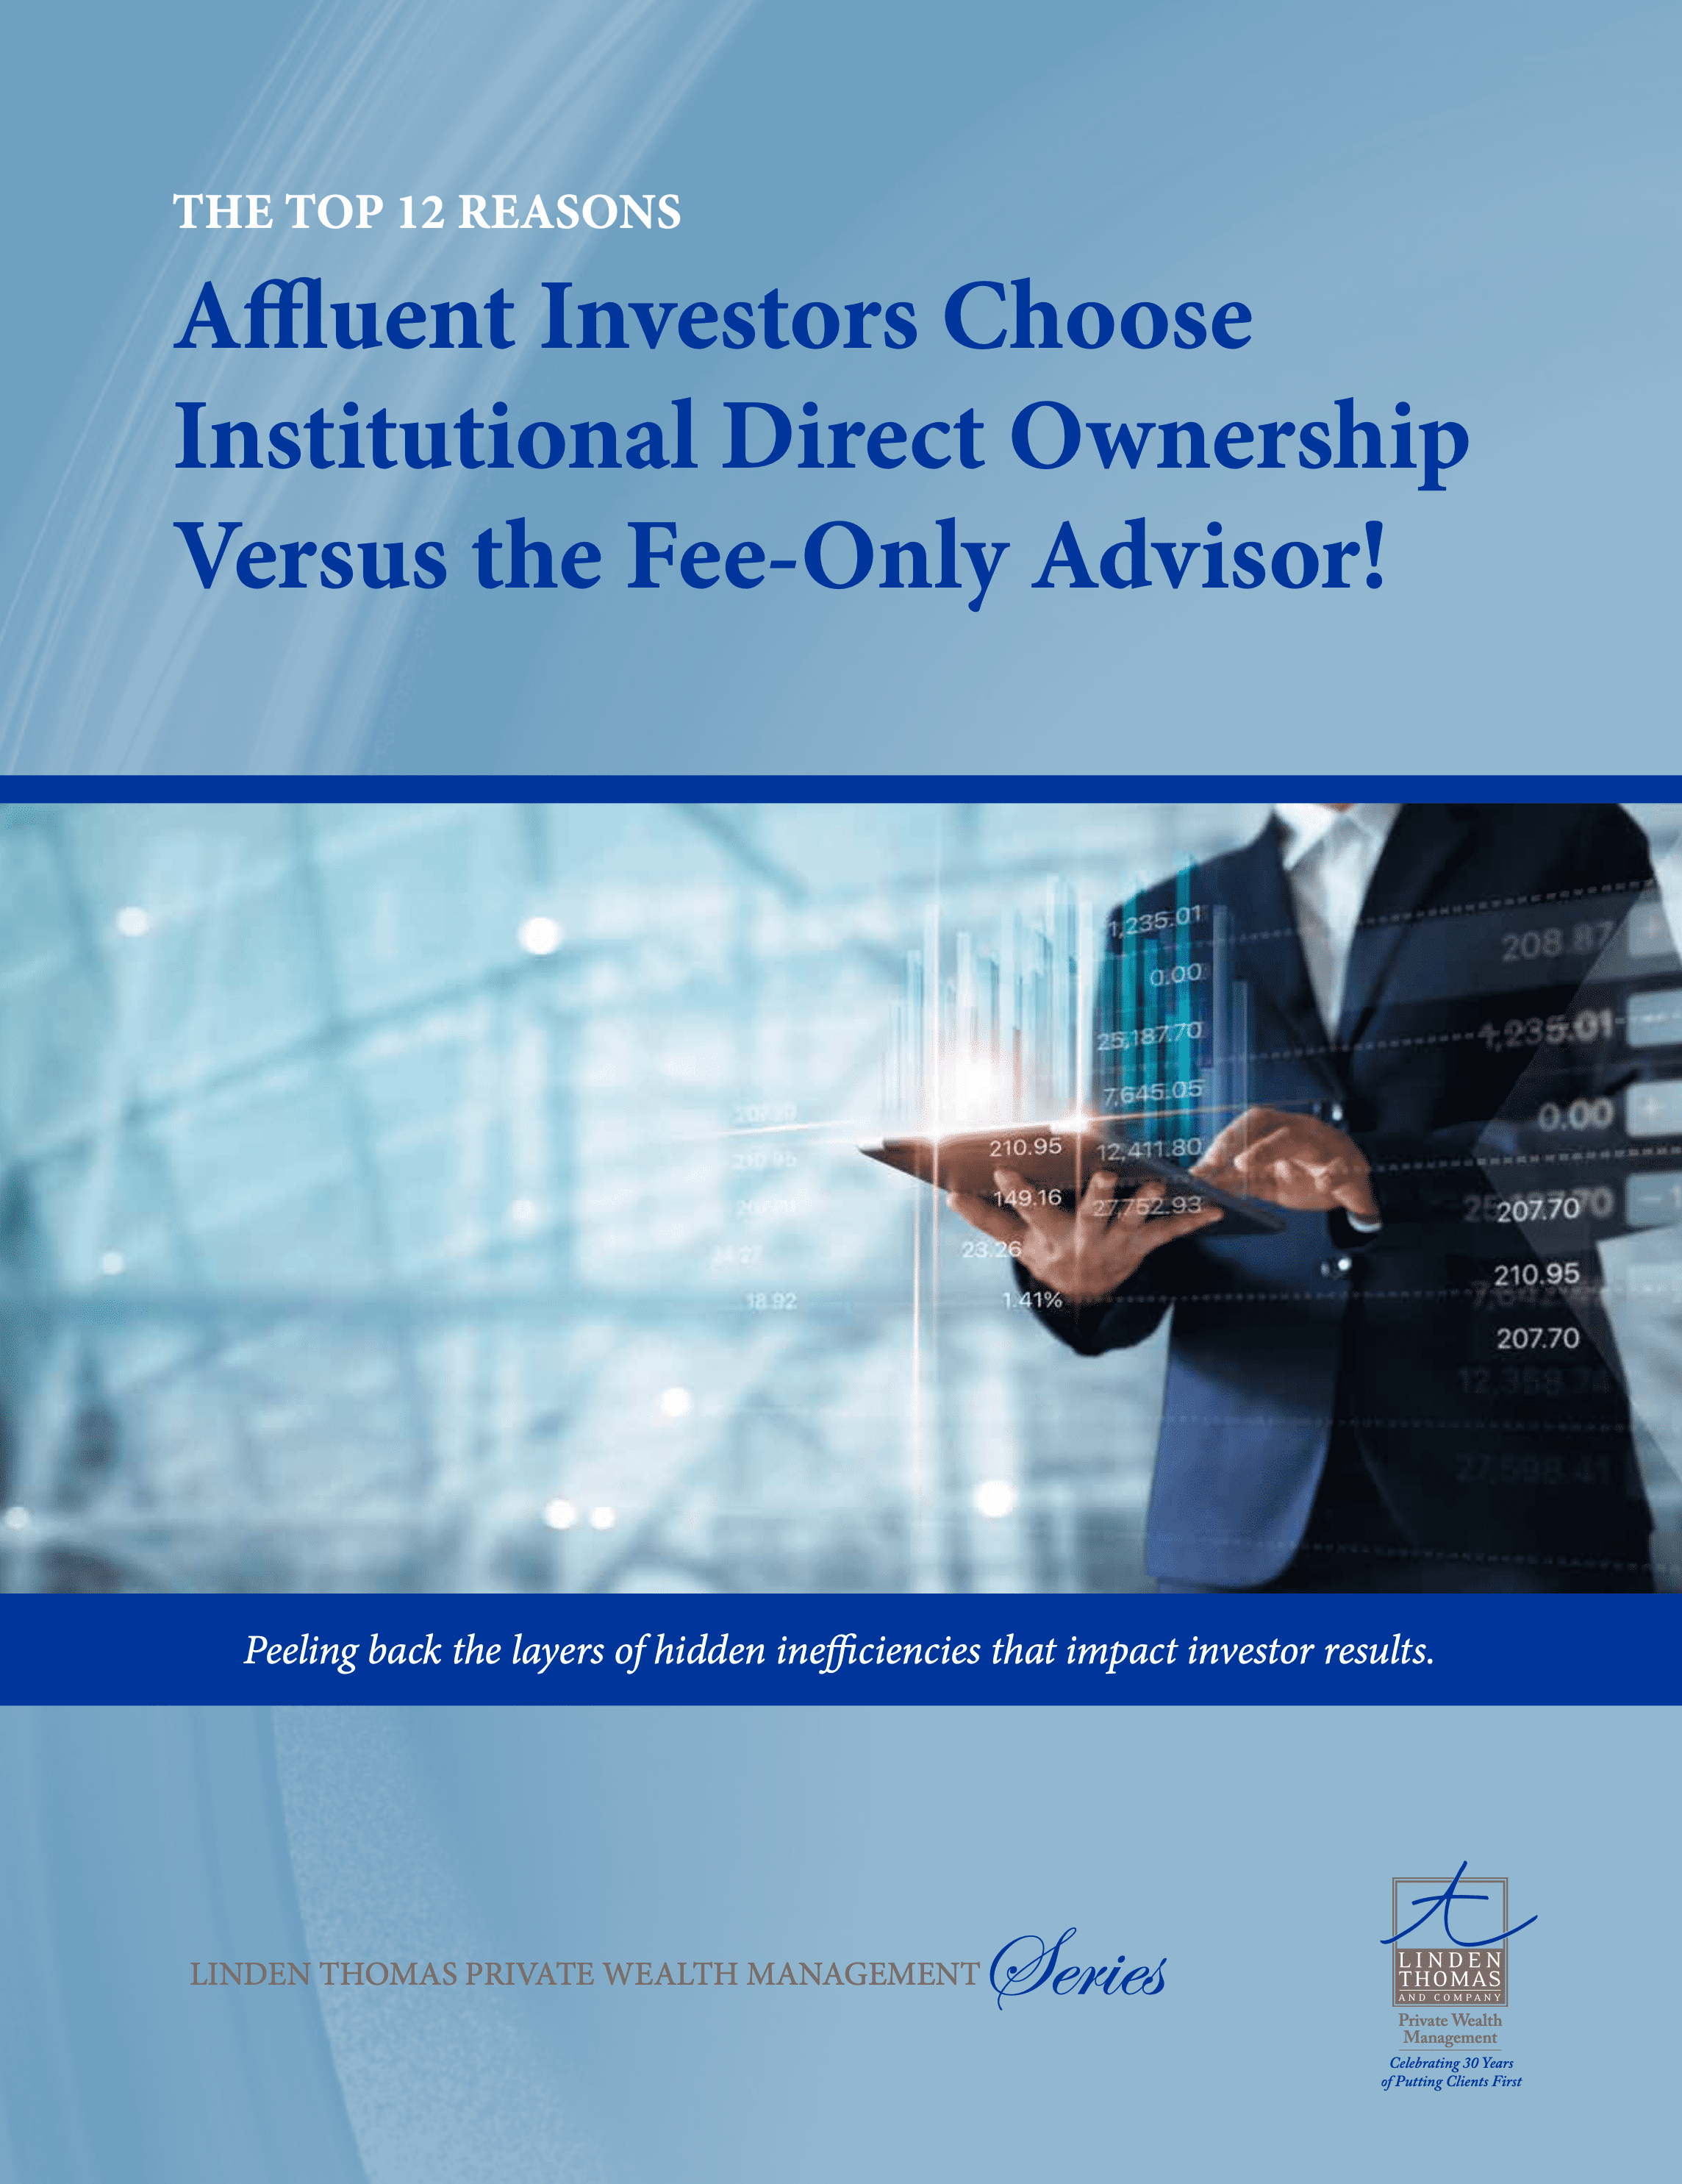 Top 12 Reasons Affluent Investors Choose Institutional Direct Ownership Versus the Fee-Only Advisor